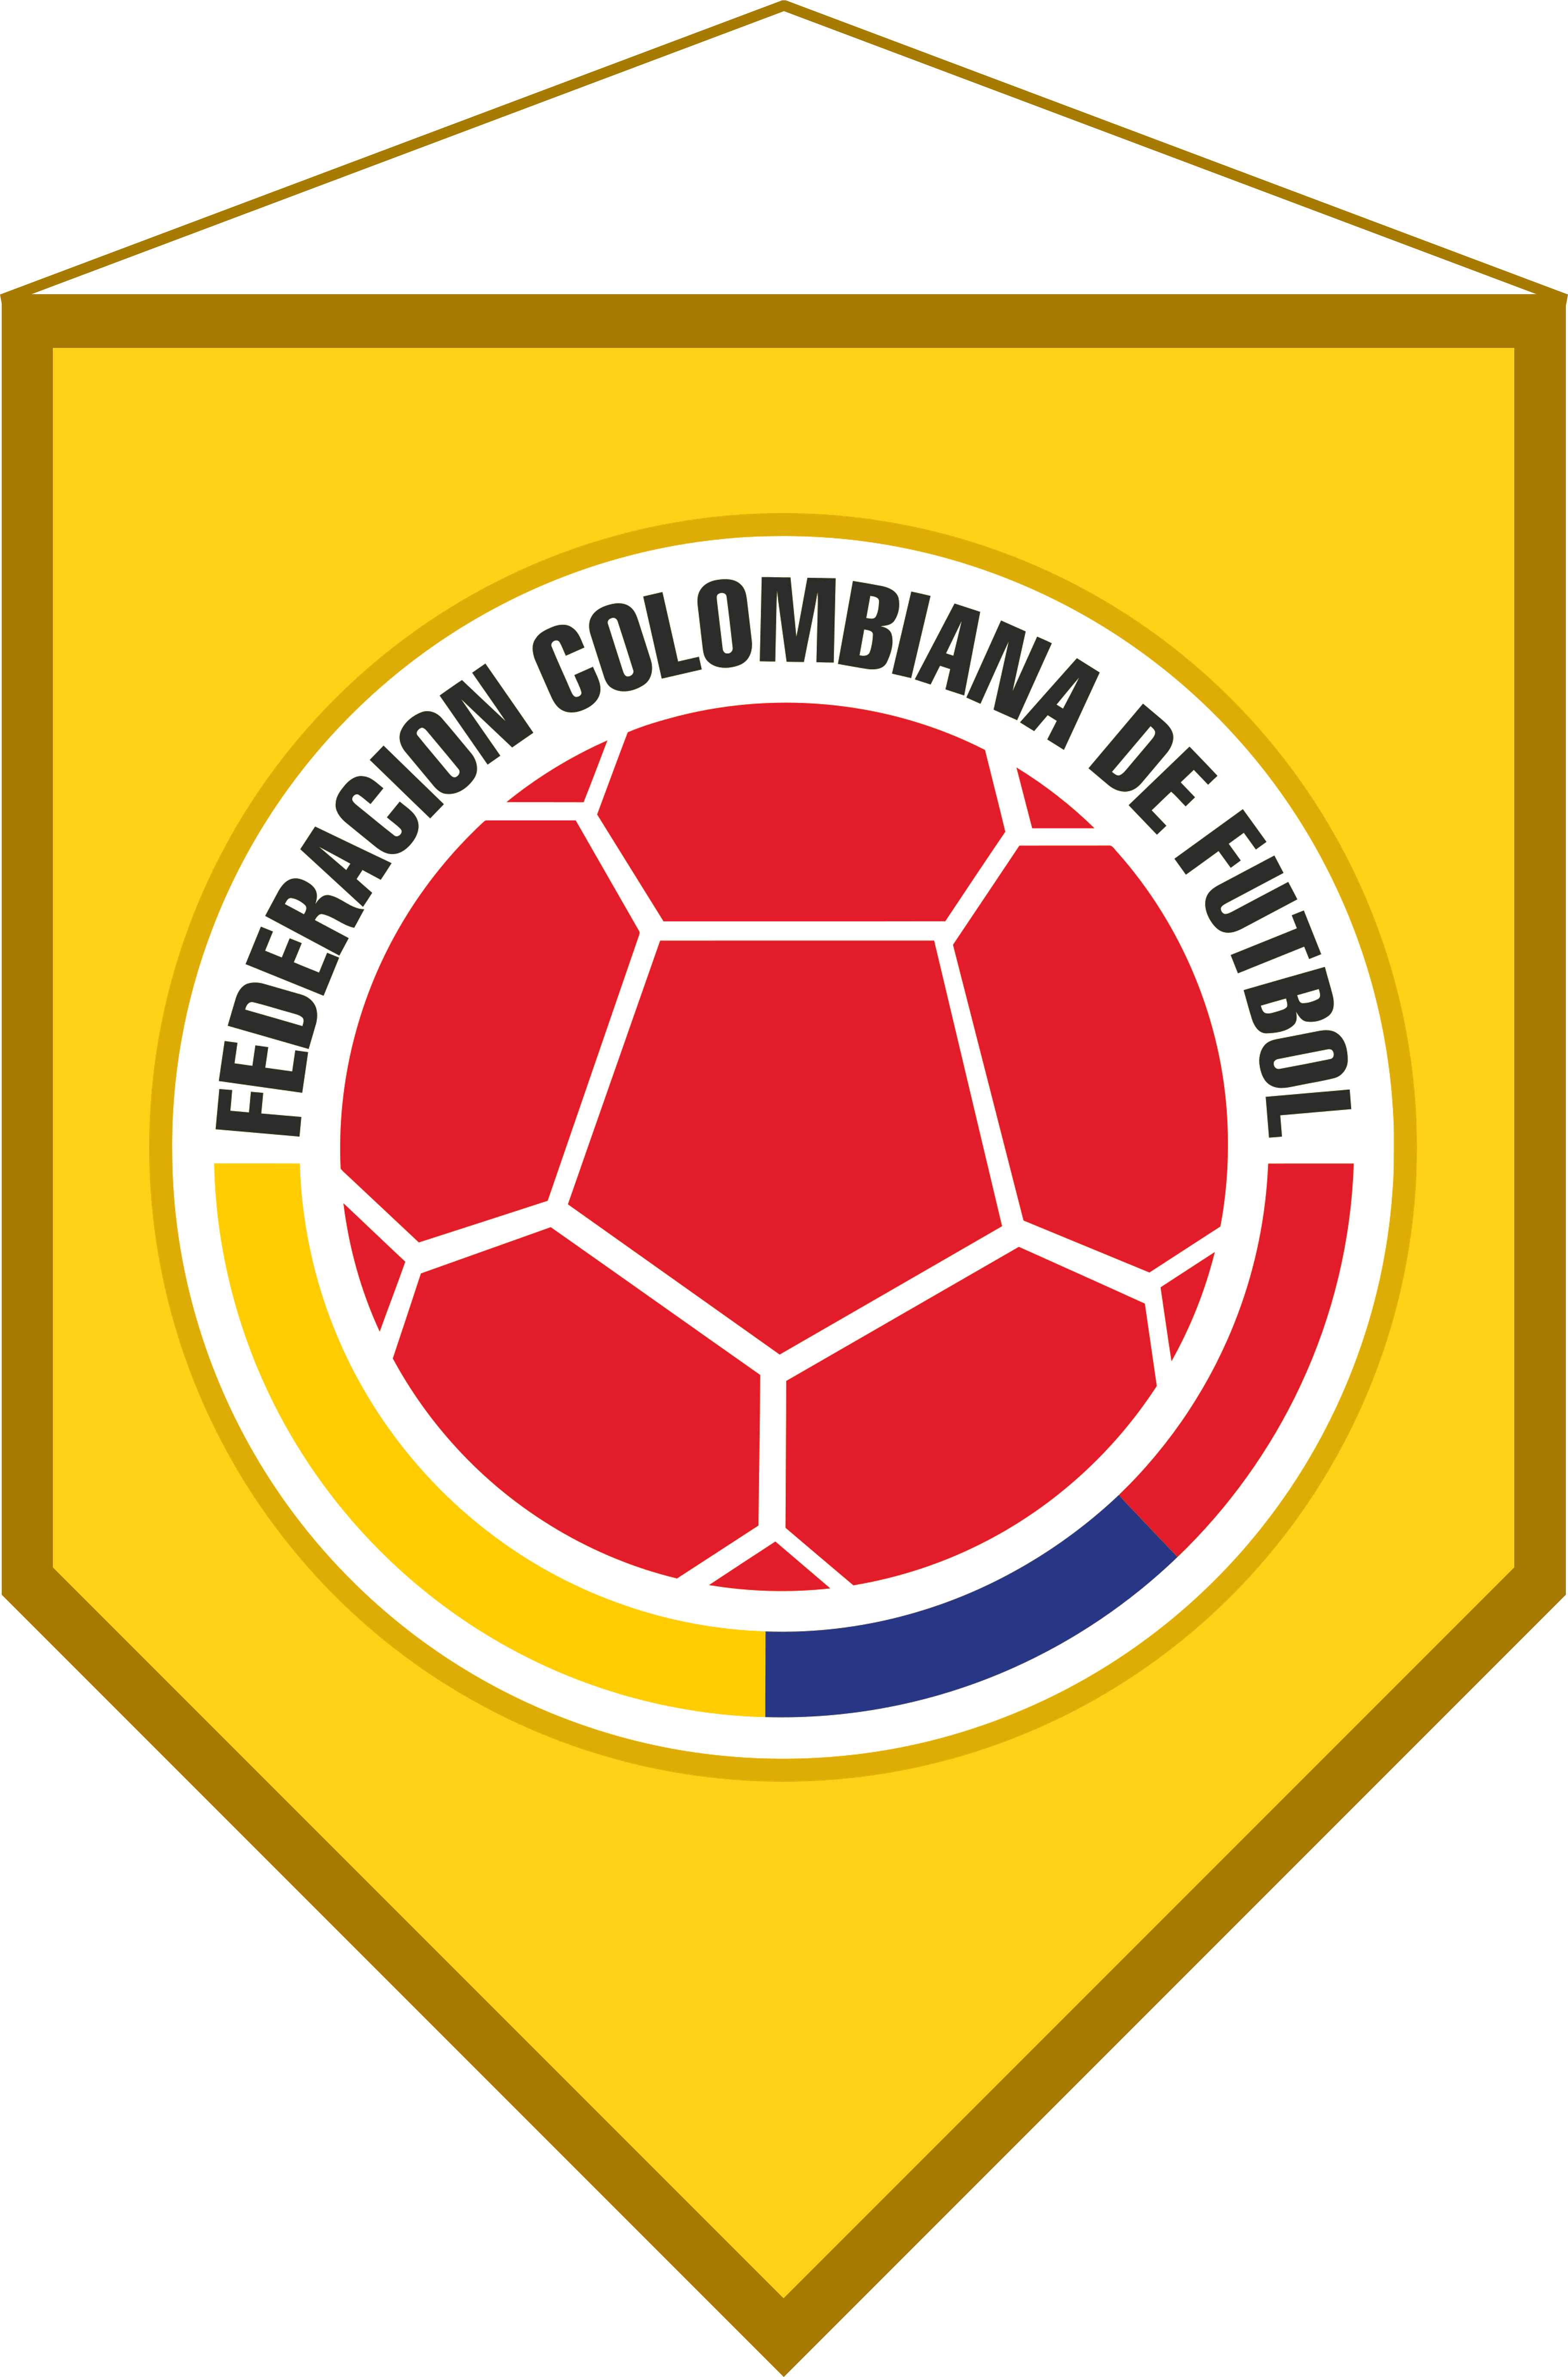 Colombia Logo - File:Logo Banderín Colombia.png - Wikimedia Commons